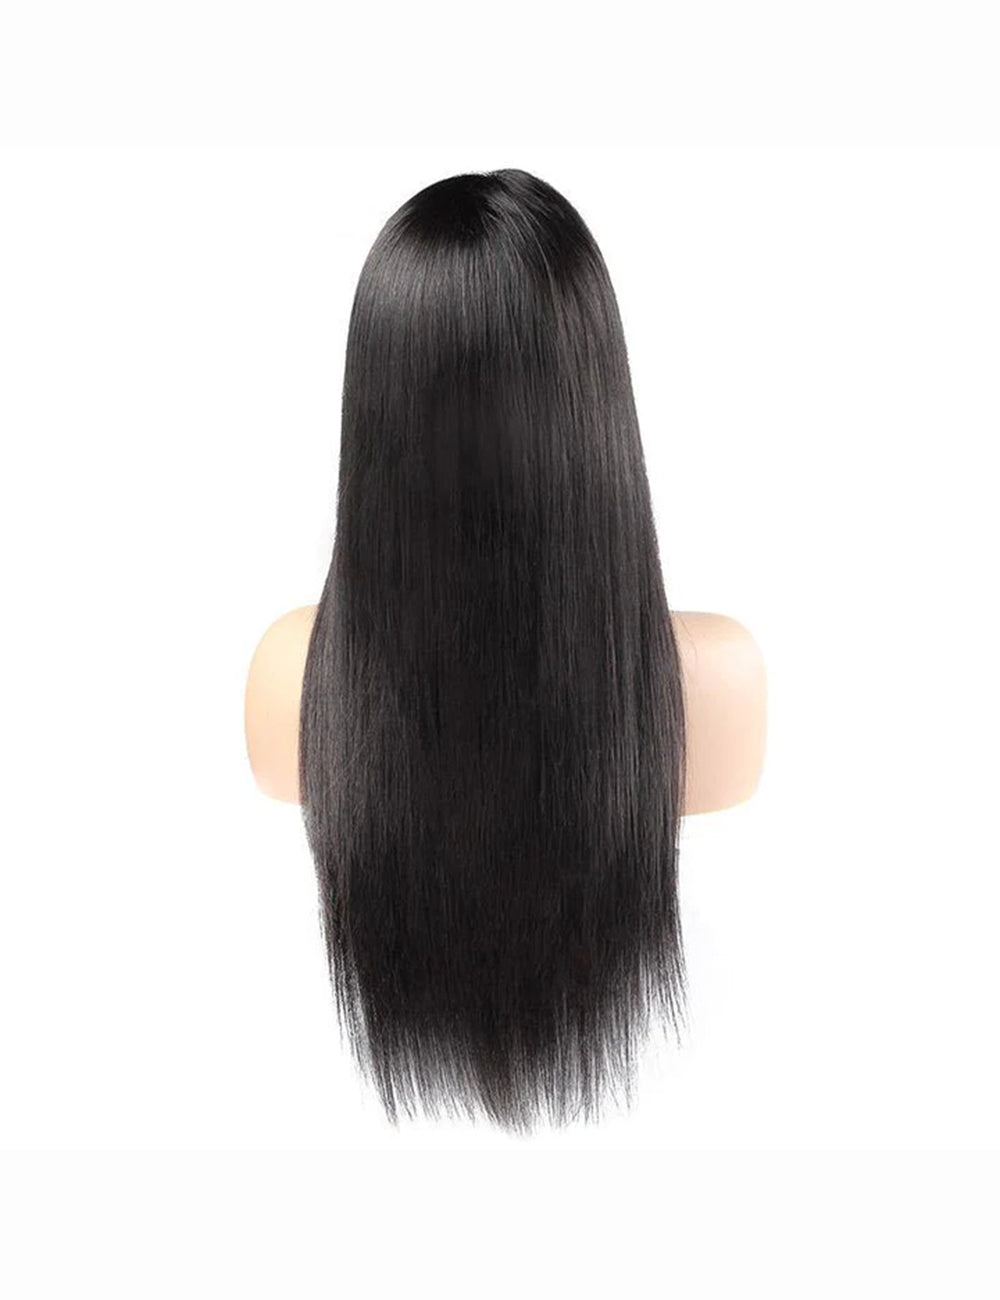 Brazilian Hair 360 Lace Frontal Wigs With Baby Hair Straight HD Human Hair Wigs